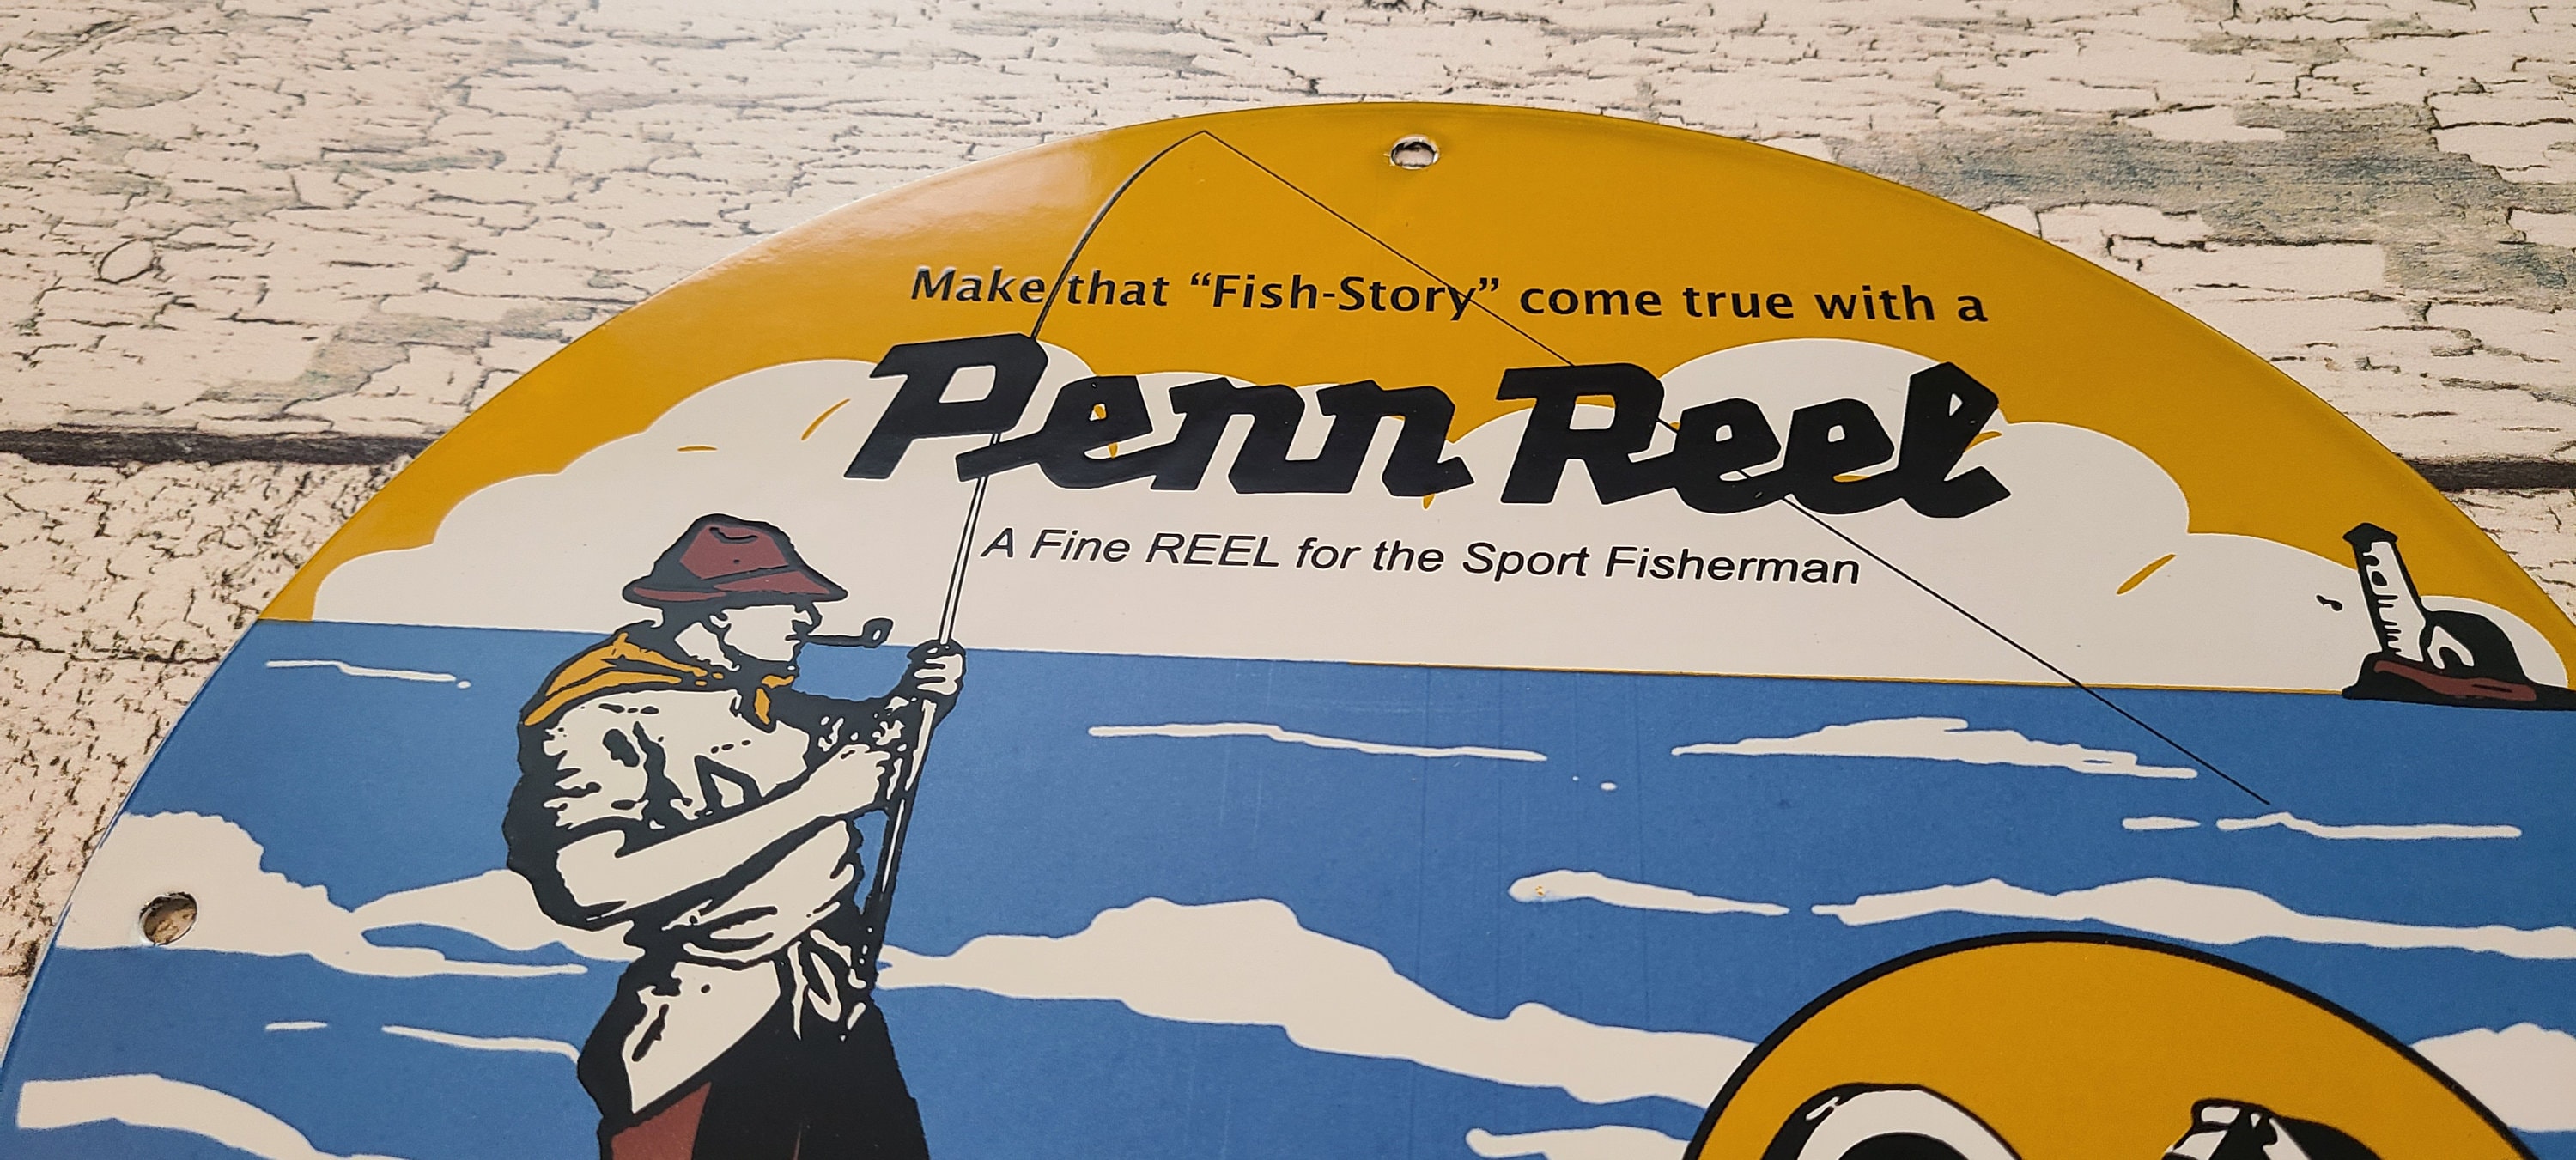 Vintage Penn Reels Porcelain Fishing Outdoor Bait and Tackle Sales Lures  Gas Pump Plate Sign 